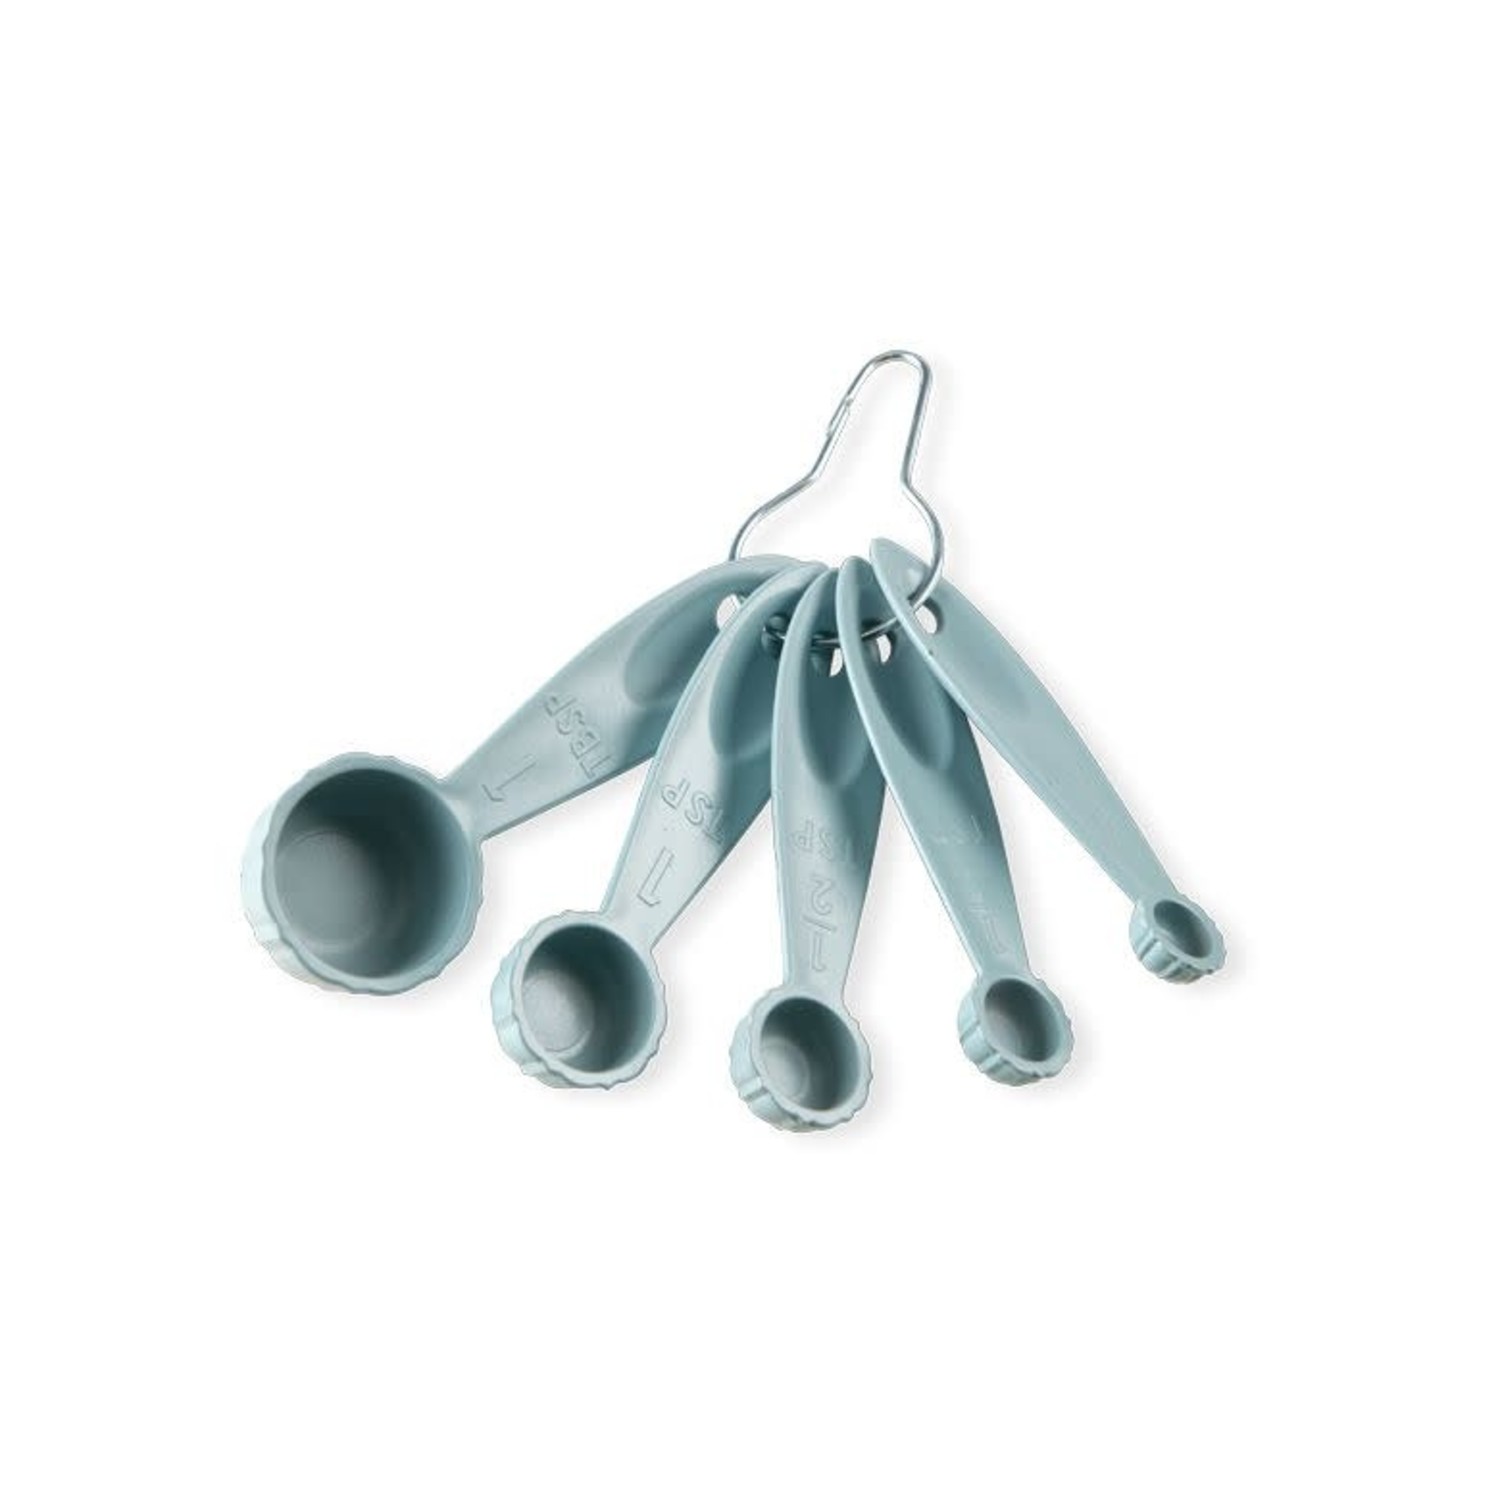 Tablecraft Measuring Spoons - Whisk